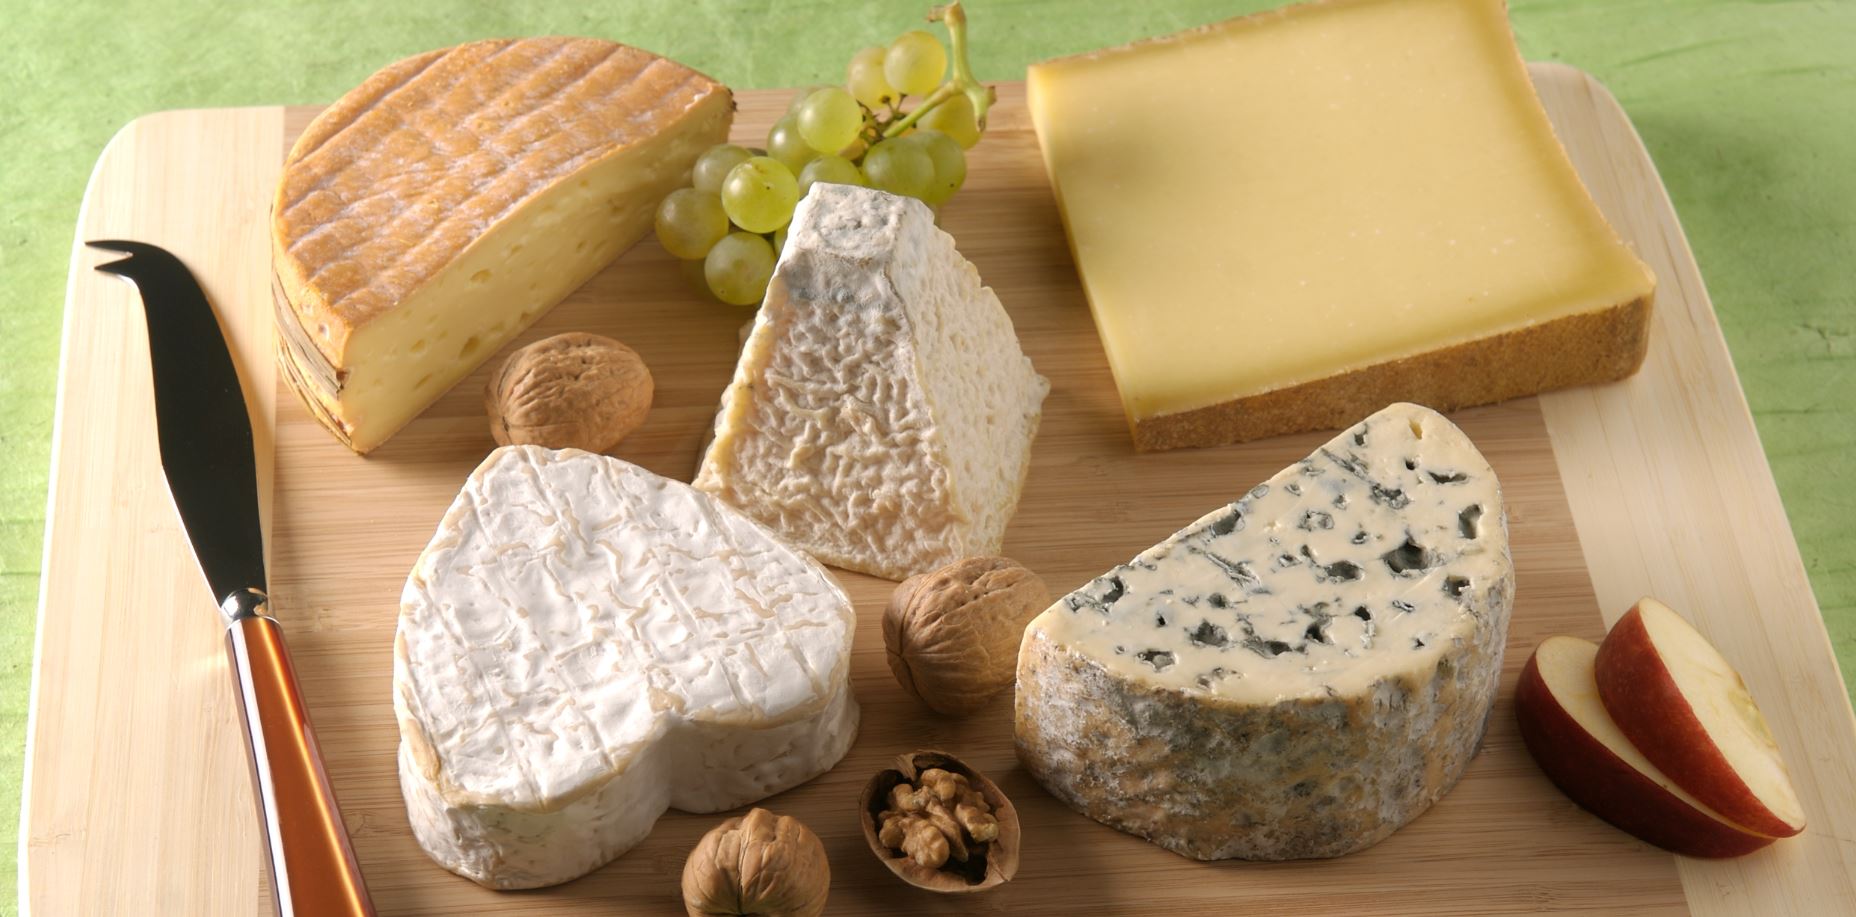 french cheese